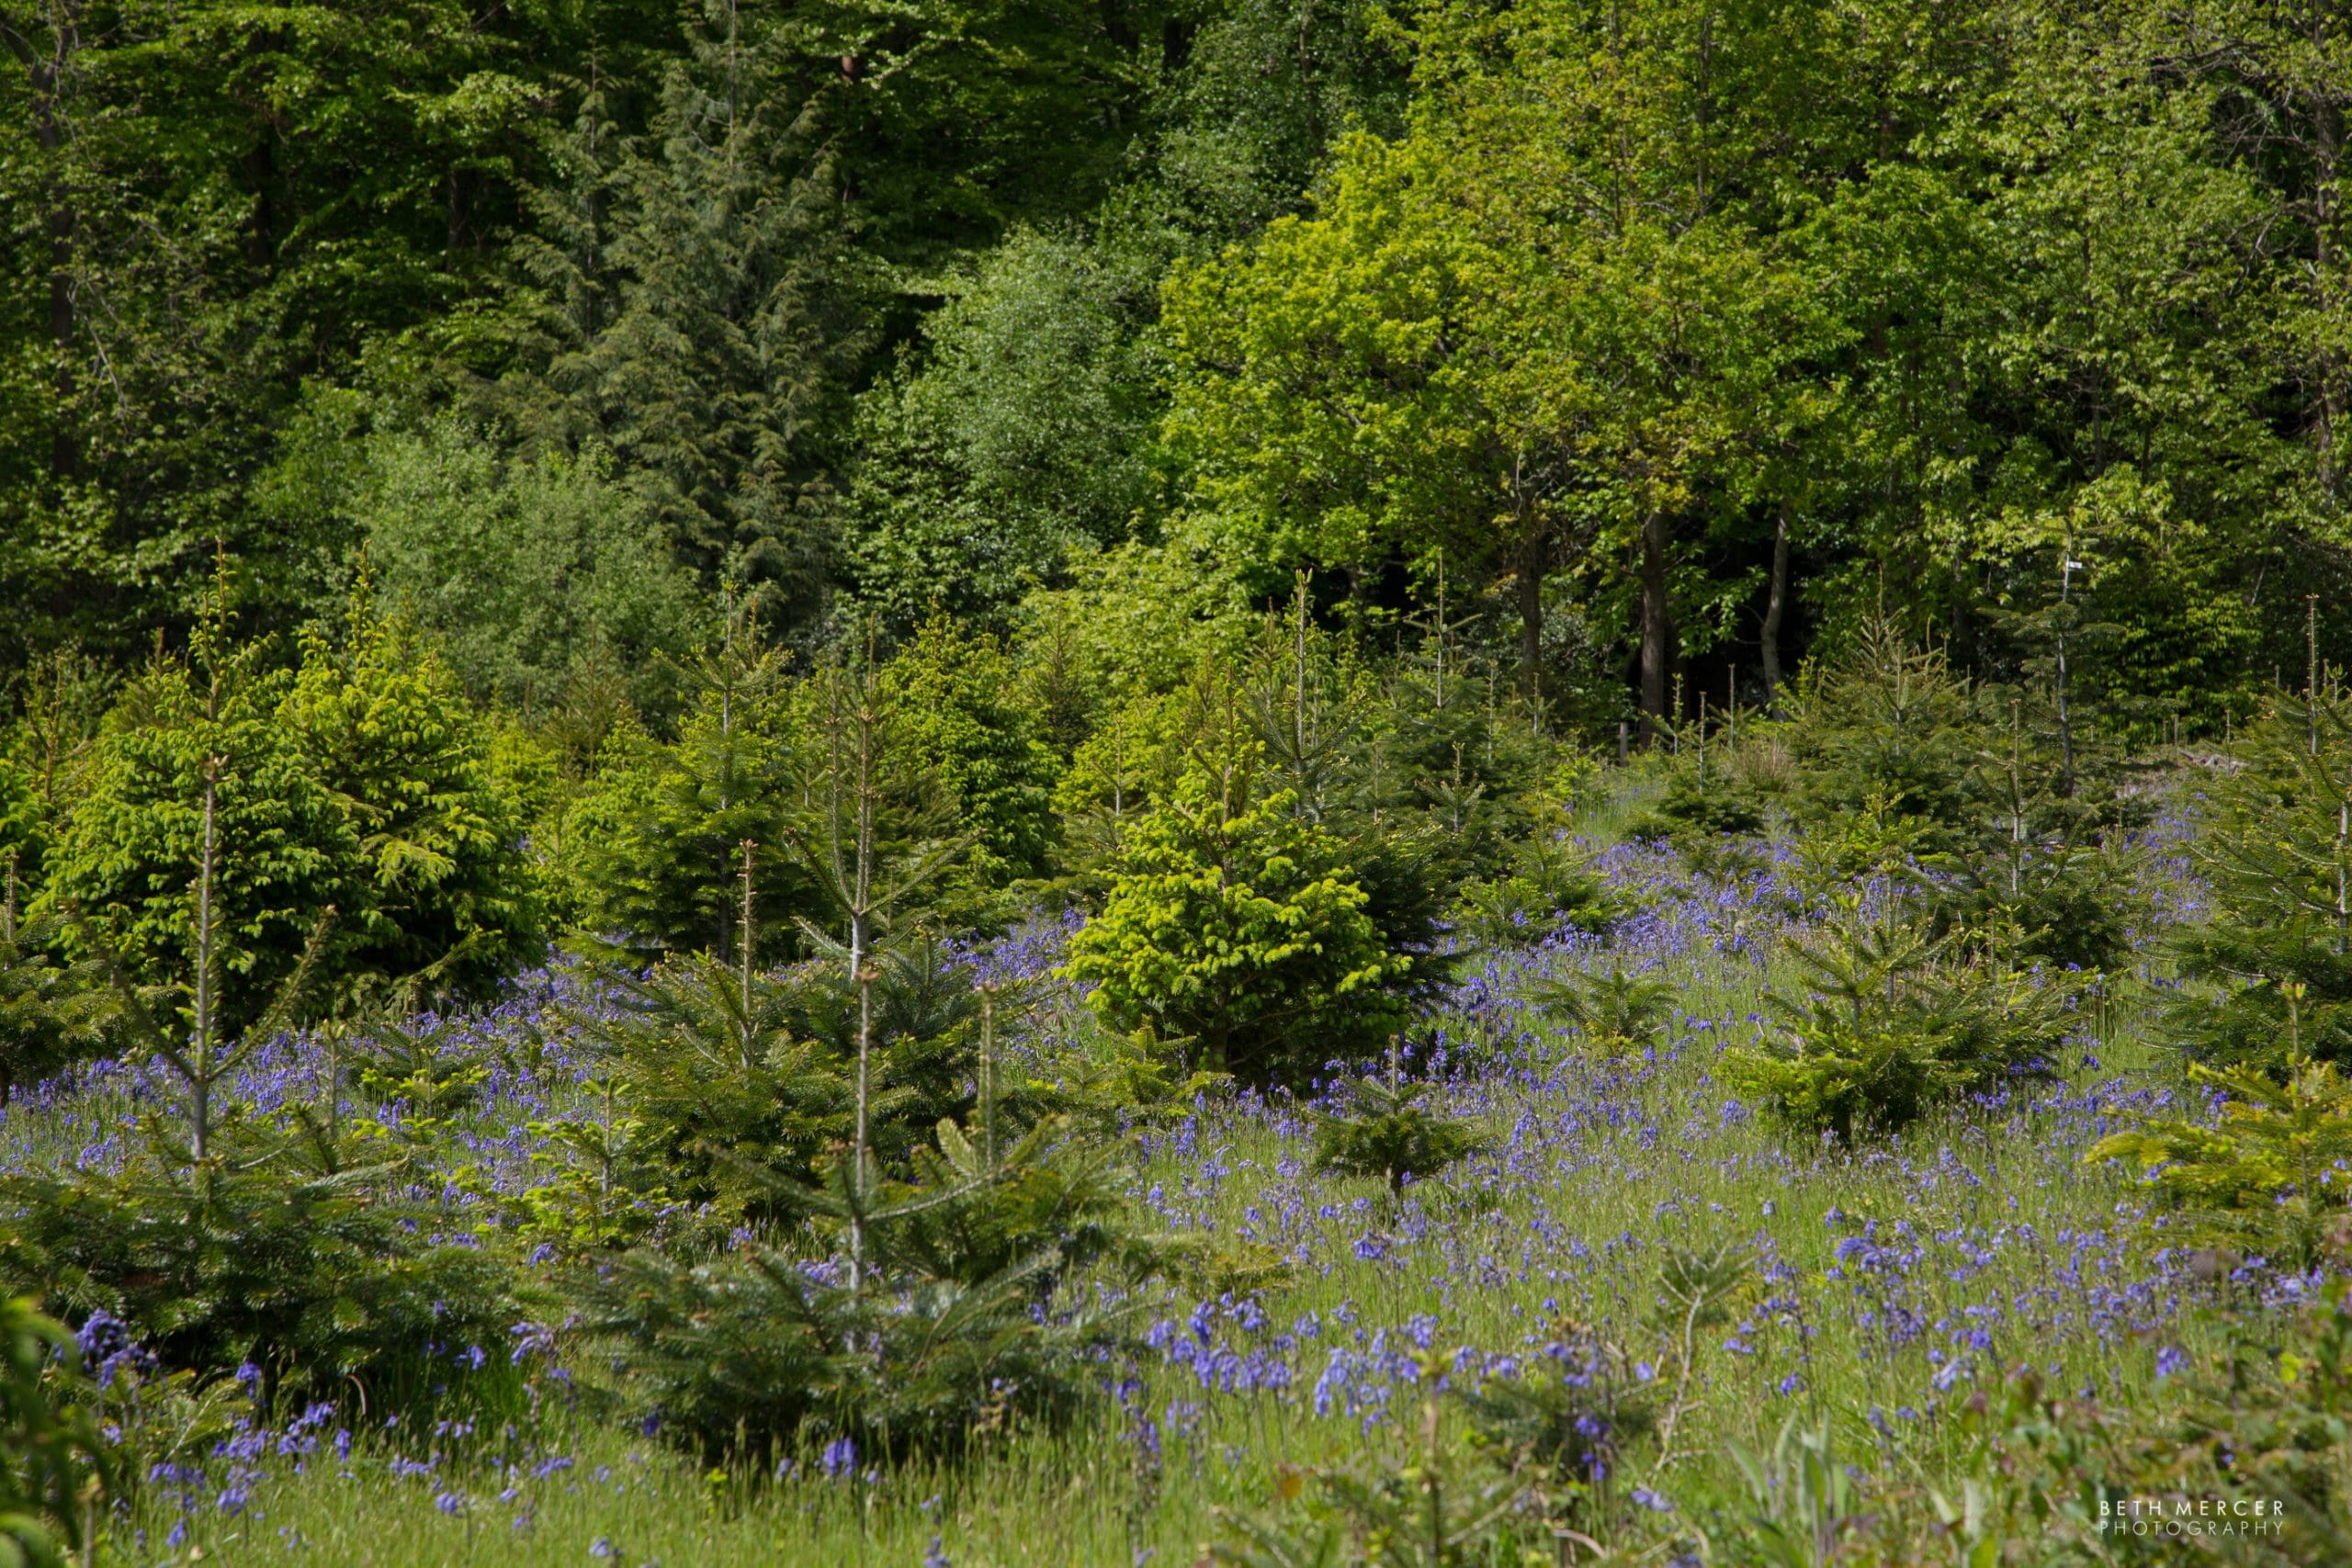 Wilderness Wood is a popular place to go in East Sussex